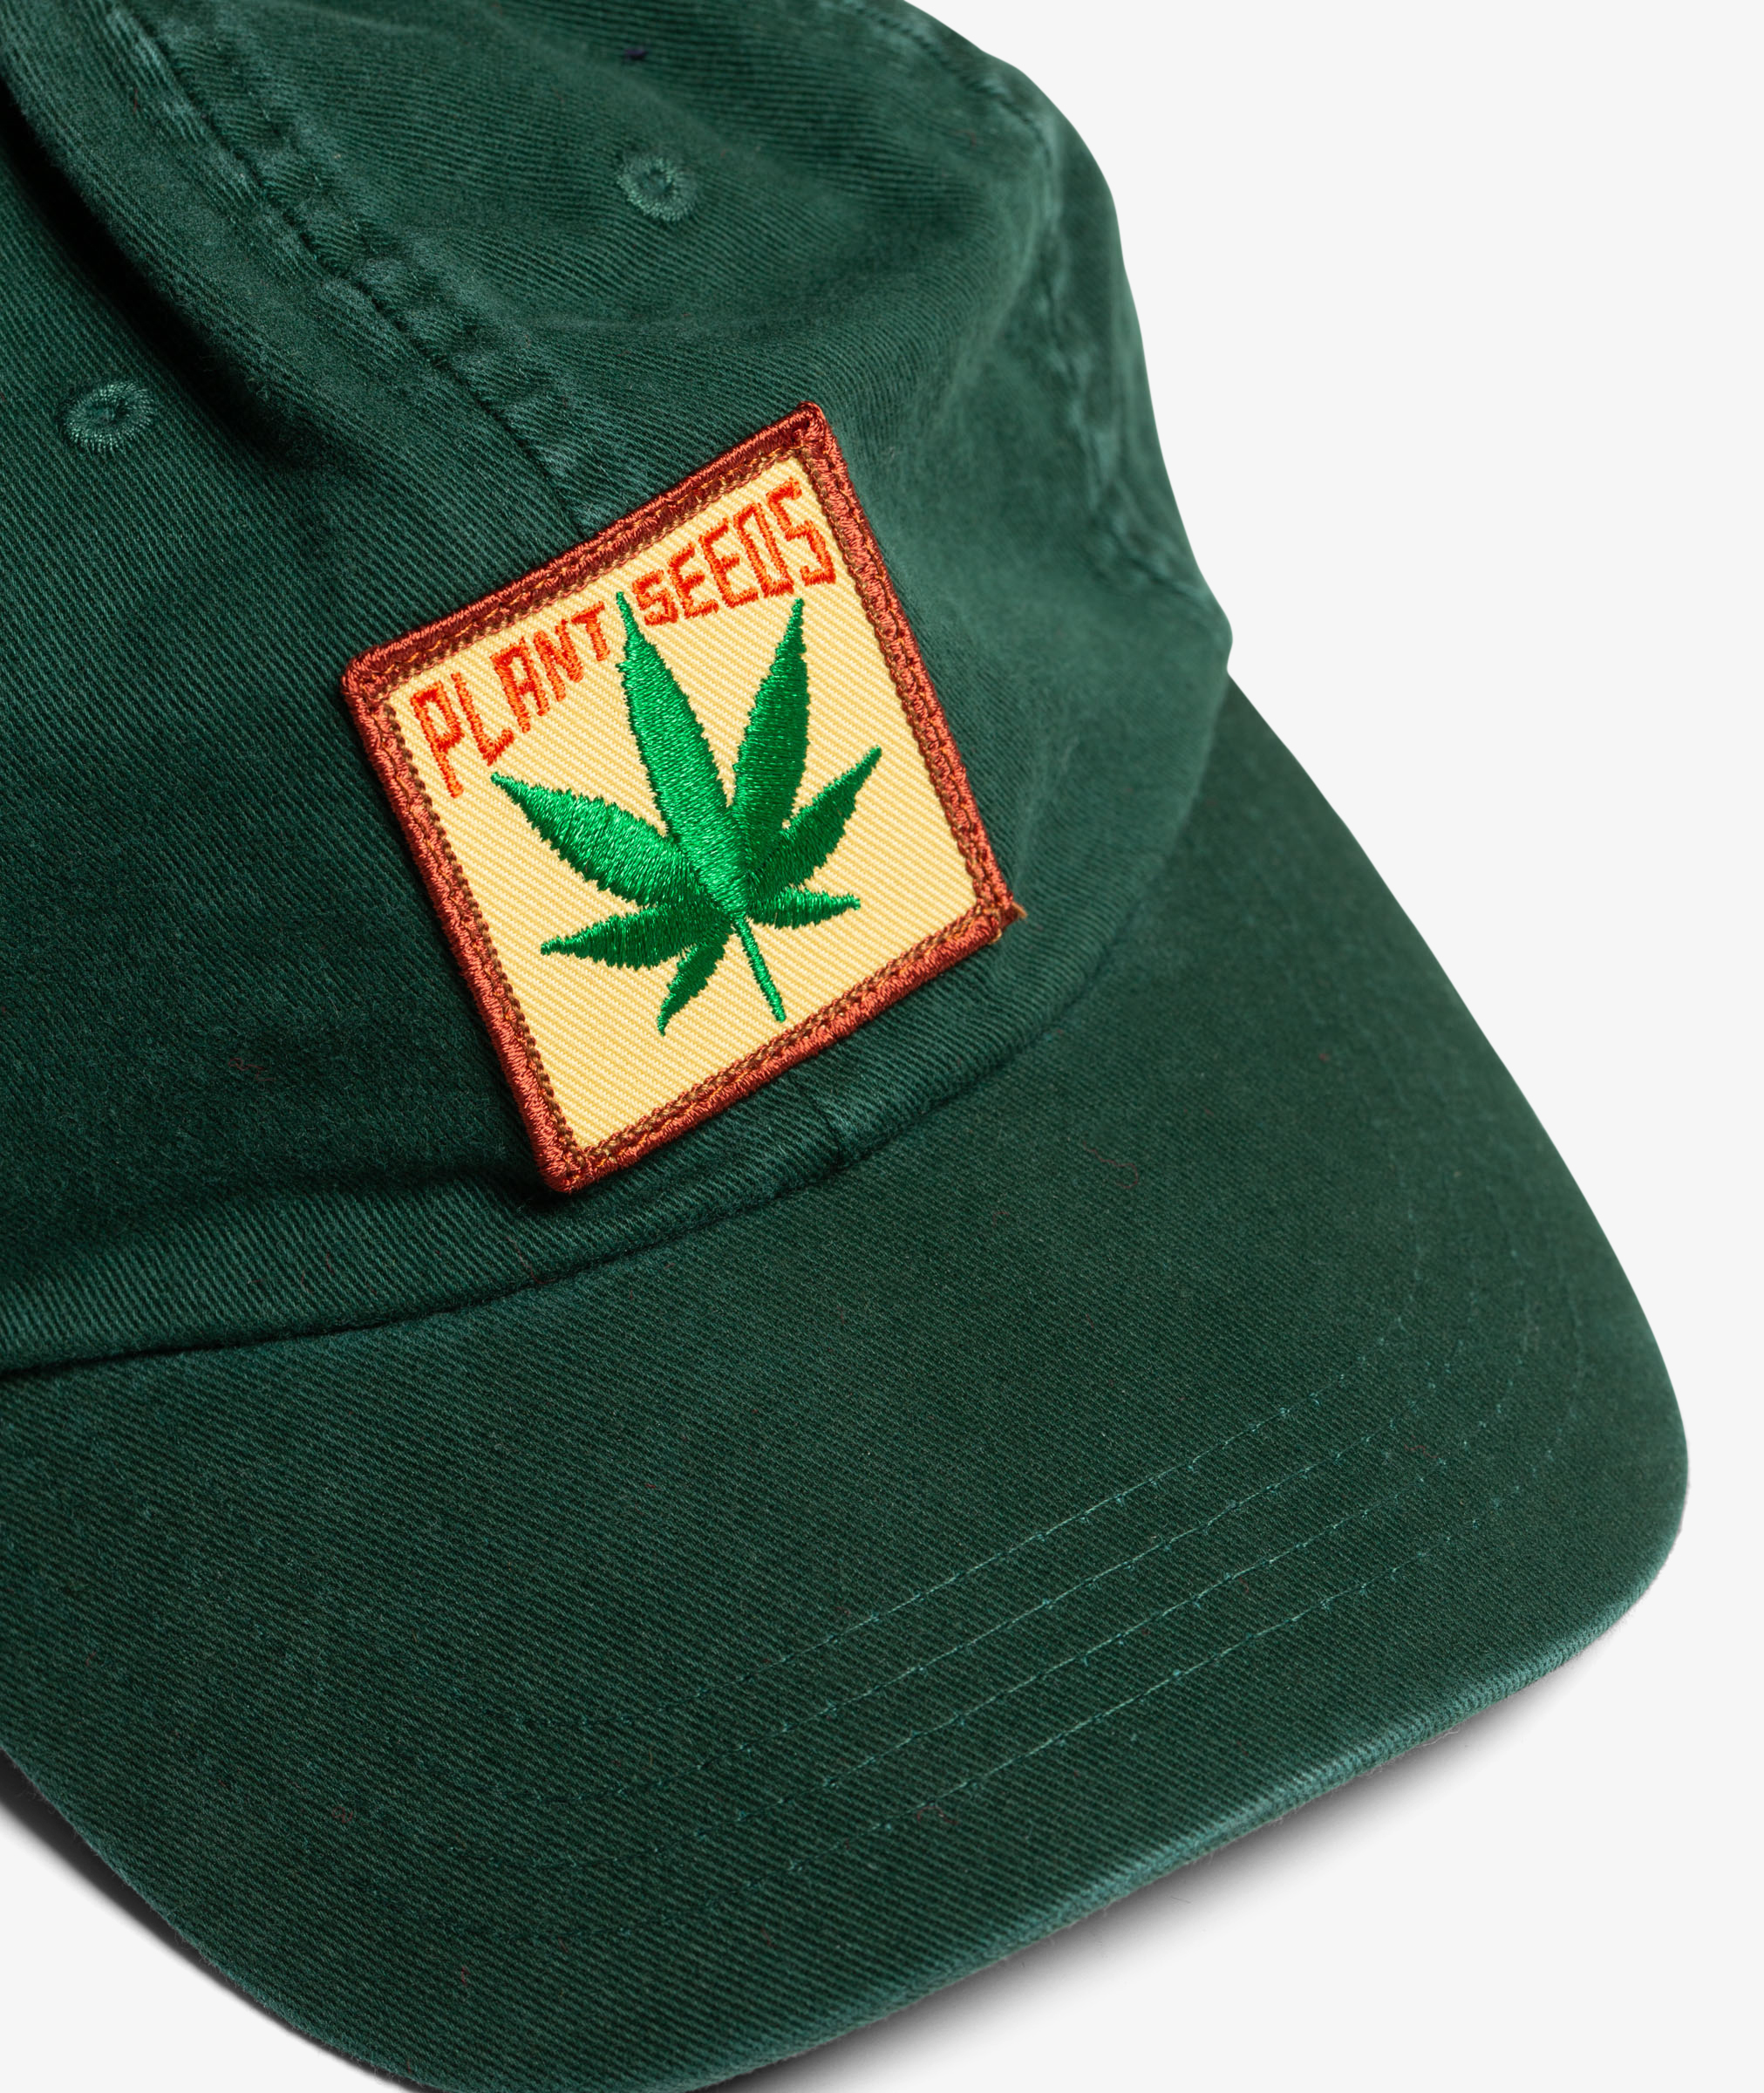 Norse Store | Shipping Worldwide - Hats - IDEA - Plant Seeds